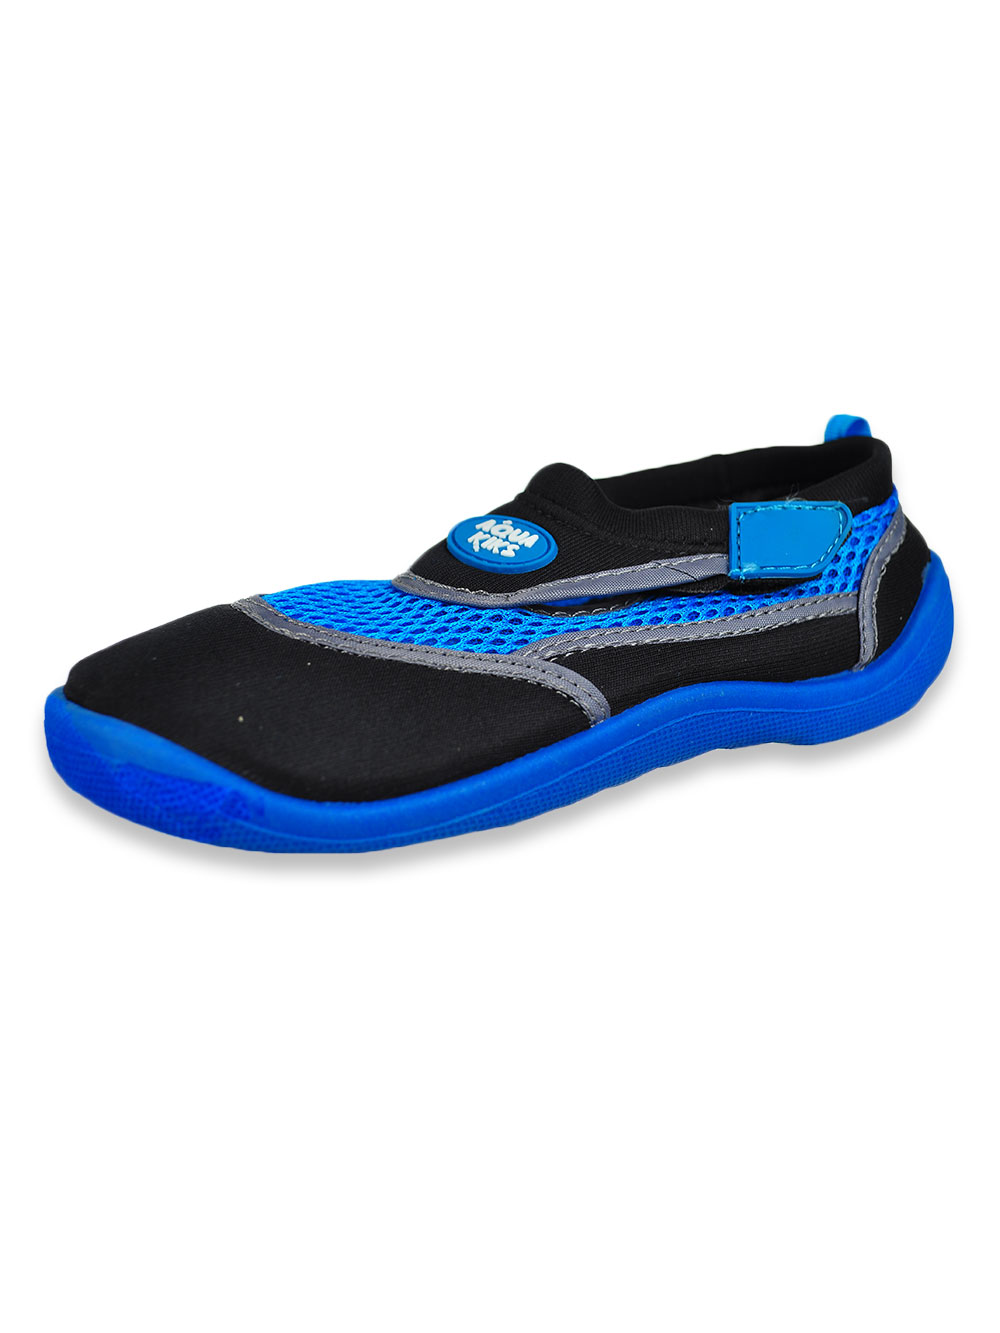 Boys' Water Shoes